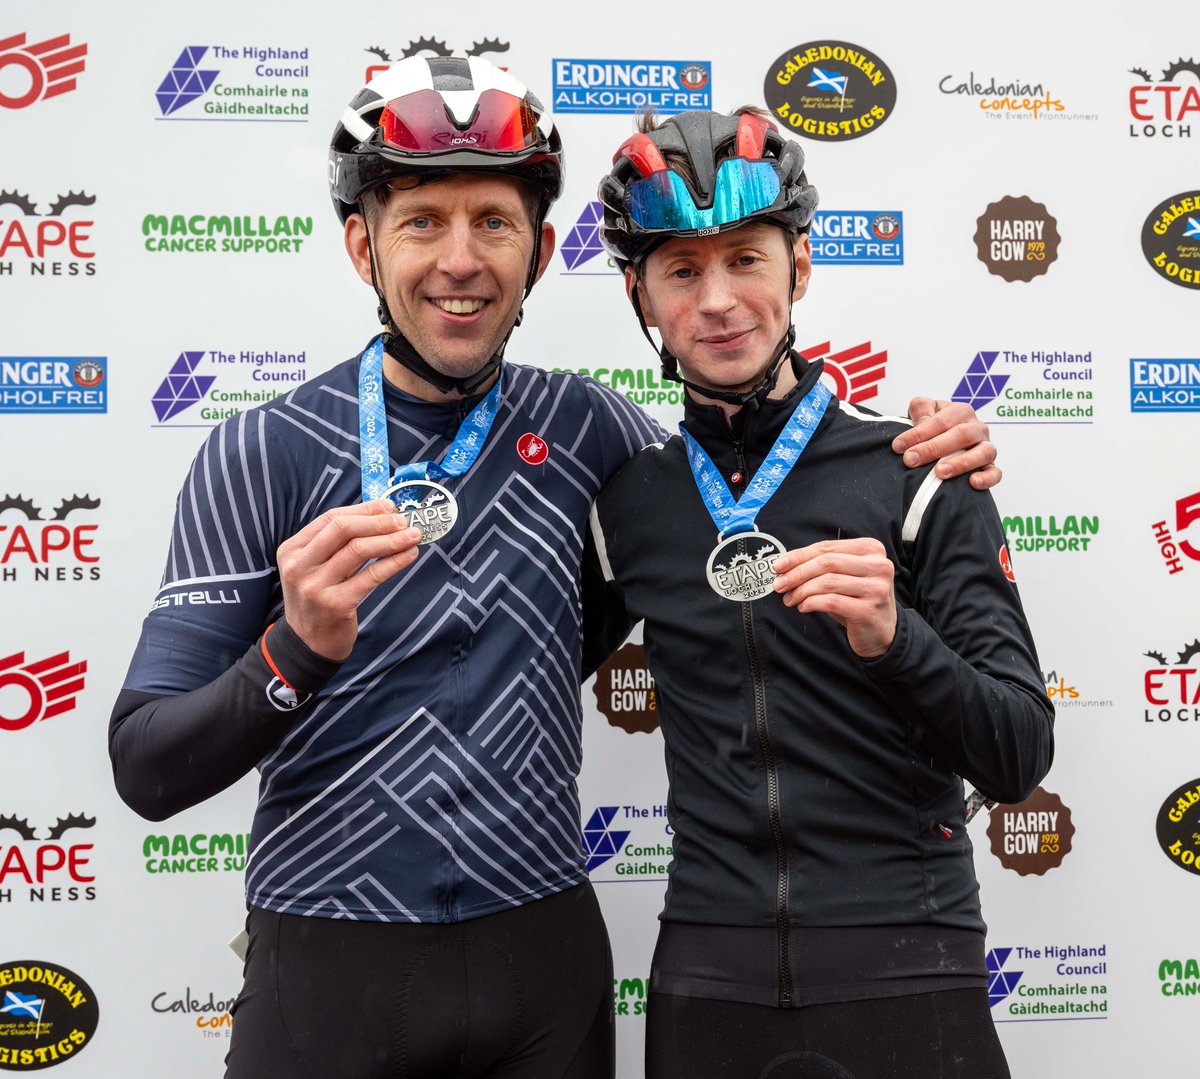 Congratulations to fastest 3 men in 2024 Etape Loch Ness: 🥇 Daniel Sutherland, Ross-shire Roads Cycle Club 2:45:26 🥈Jonathan Forbes, Ross-shire Roads Cycle Club 2:46:16 🥉 Gavin Dempster, Moray Firth Cycling Club 2:46:19 #etapelochness #ridelochness